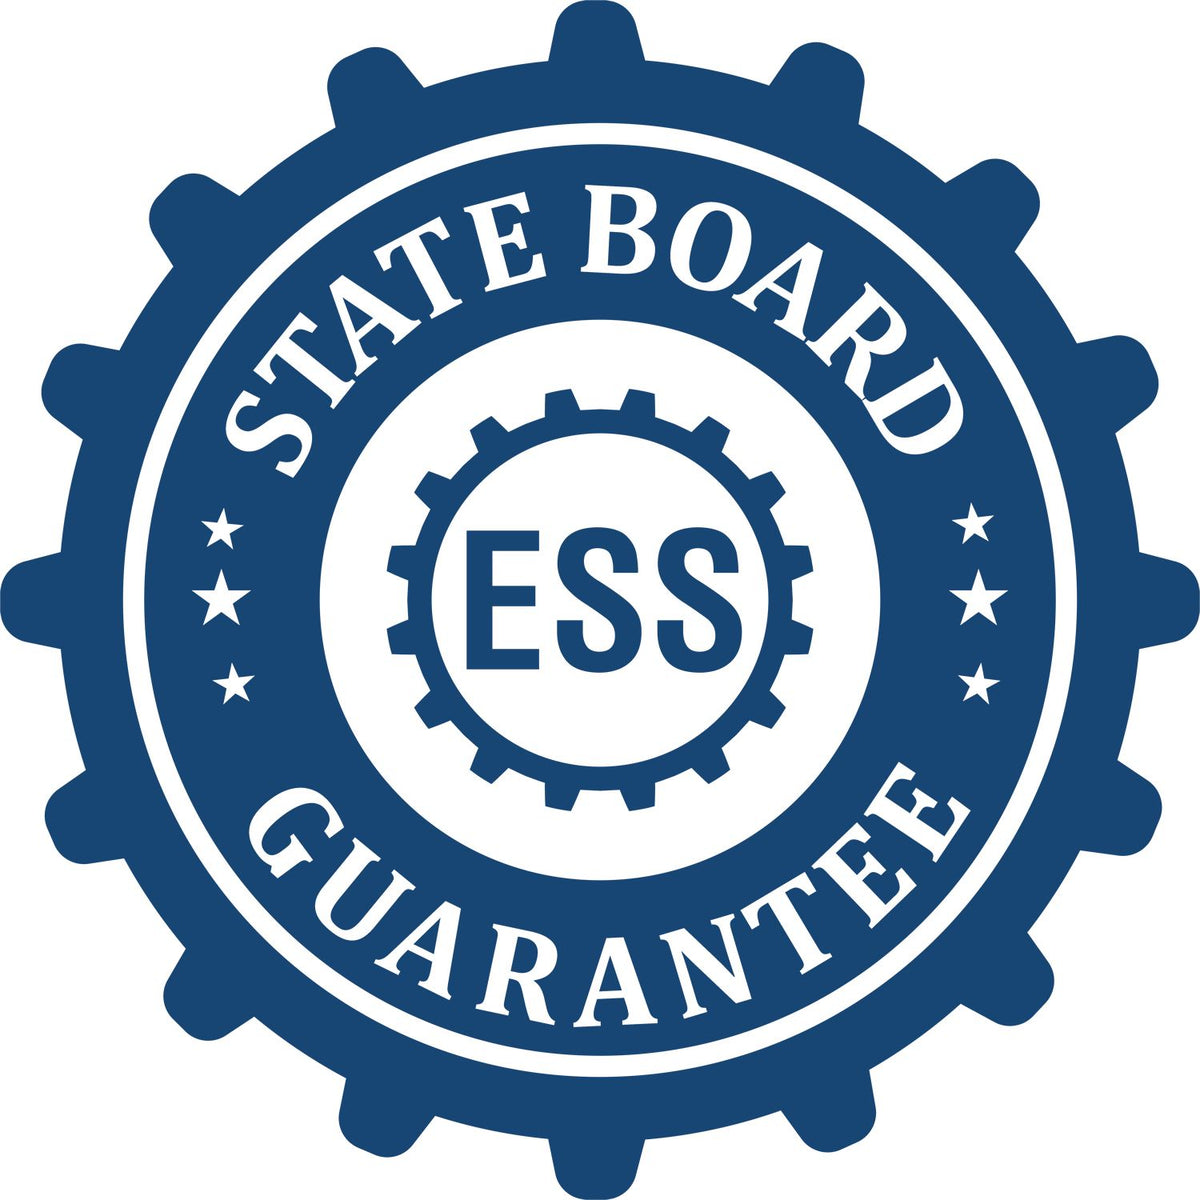 An emblem in a gear shape illustrating a state board guarantee for the Hybrid Indiana Architect Seal